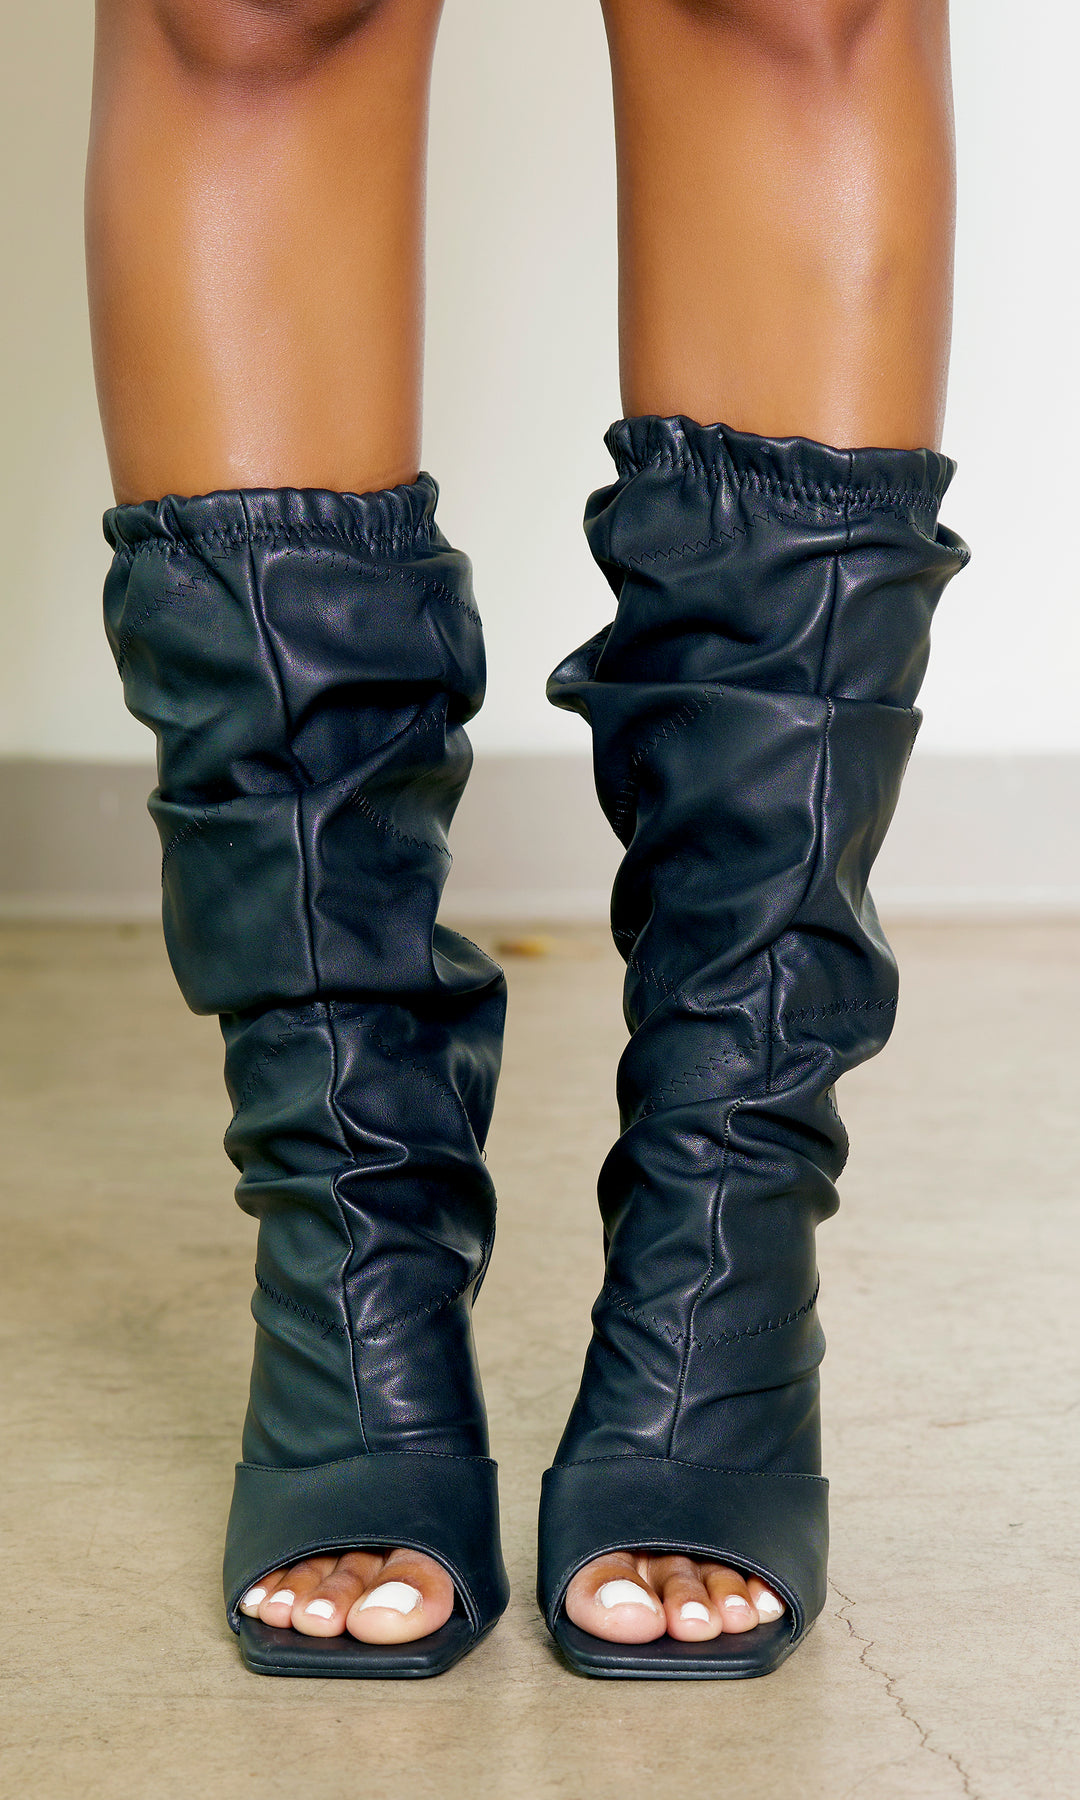 Patent leather open toe boots